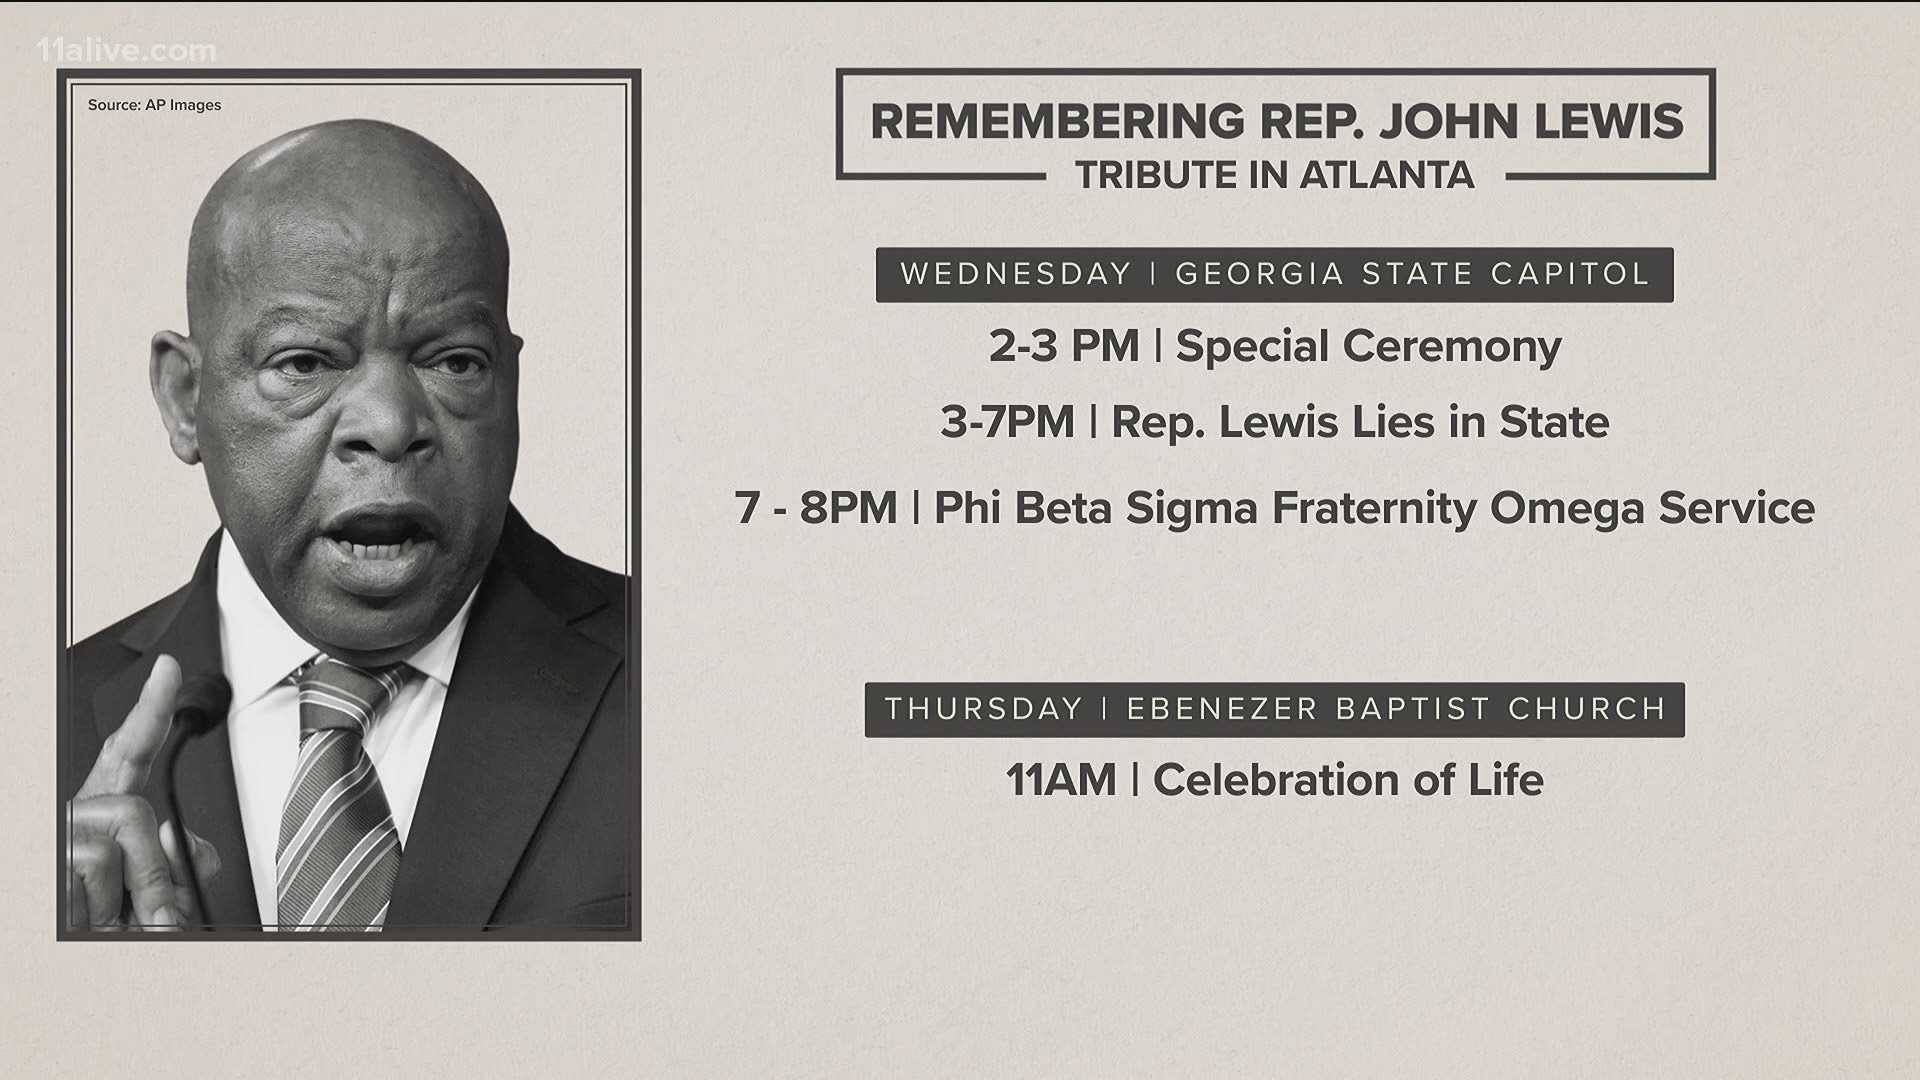 Rep. John Lewis is expected to arrive at the Georgia State Capitol at 2 p.m. on Wednesday where a special ceremony will take place in the Rotunda.